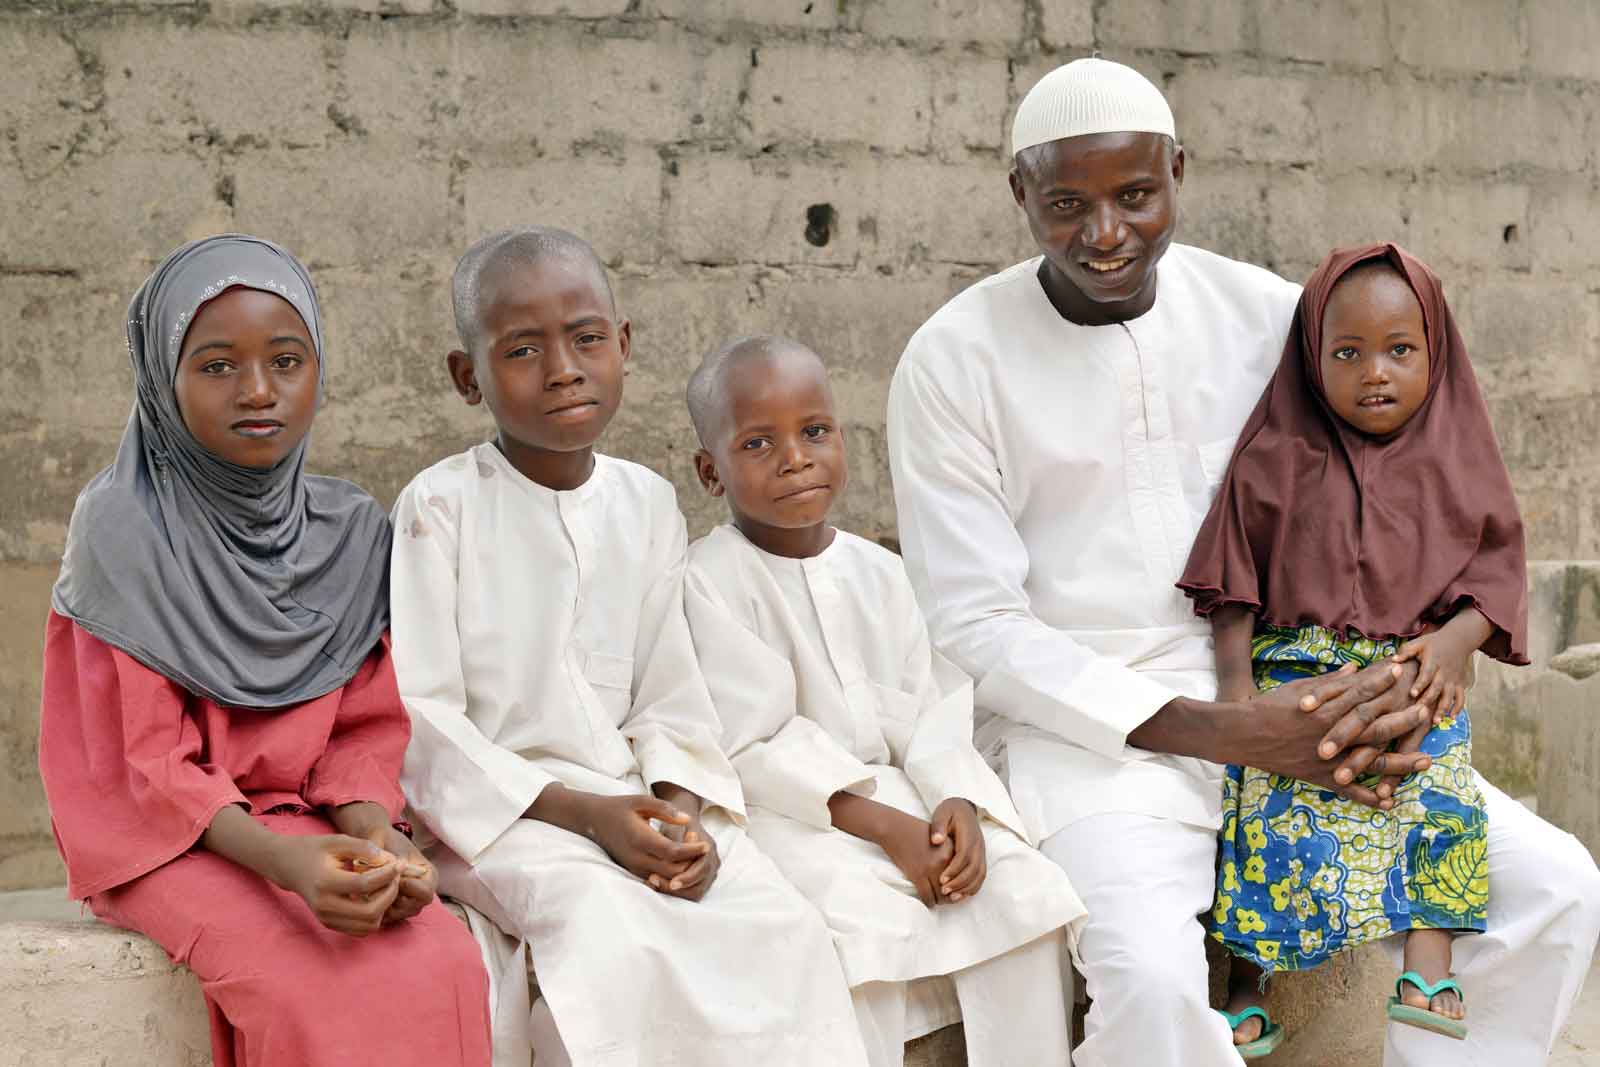  Yusuf Ibrahim, father of four and a community immunisation advocate who lives in Niger State, was taught as a youngster that vaccines were dangerous. His beliefs were transformed a decade ago when his daughter Saratu, now 13 (far left), nearly died from pneumonia.